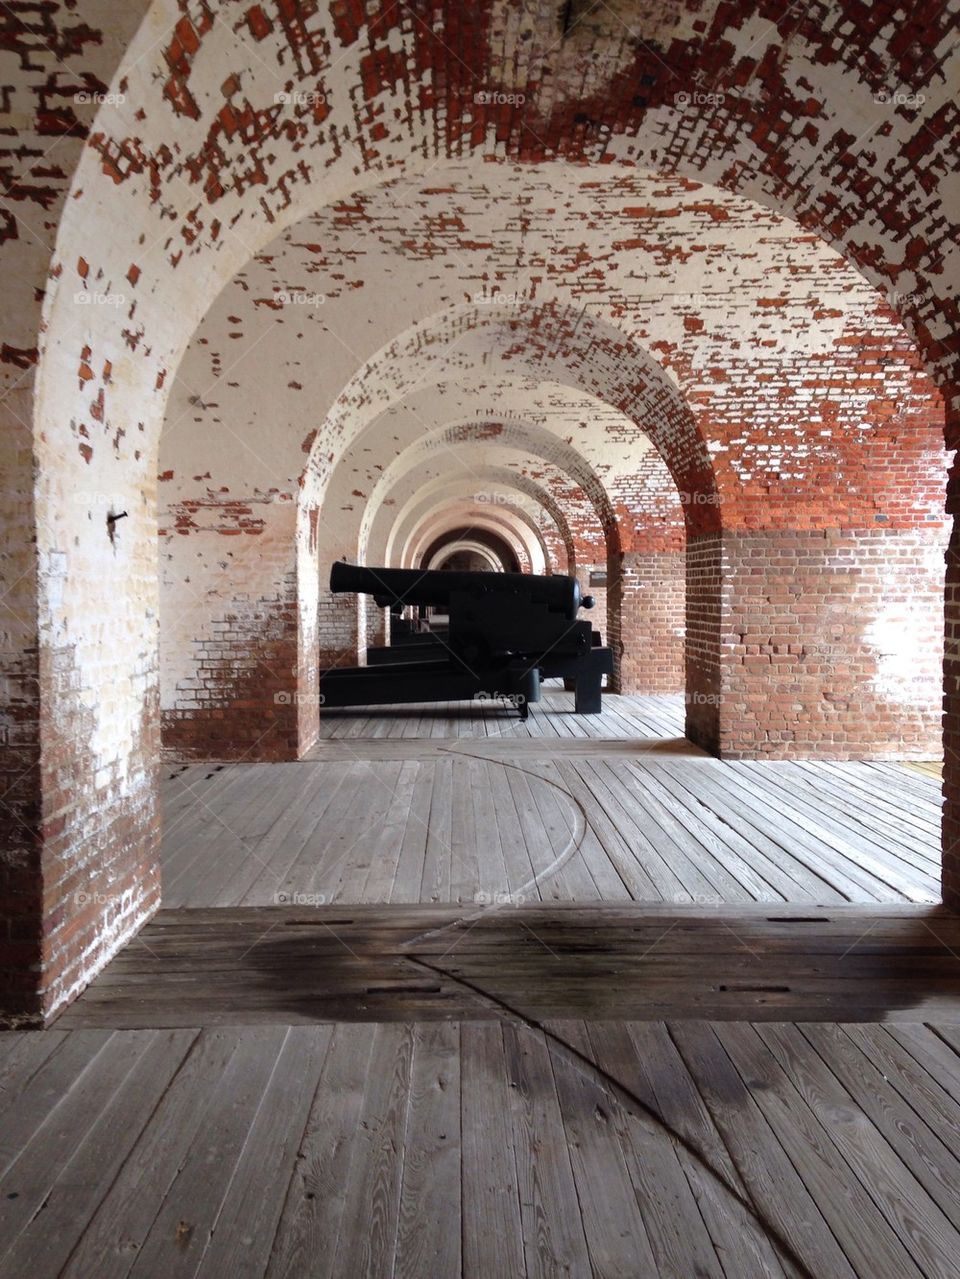 Cannons at Fort Pulaski